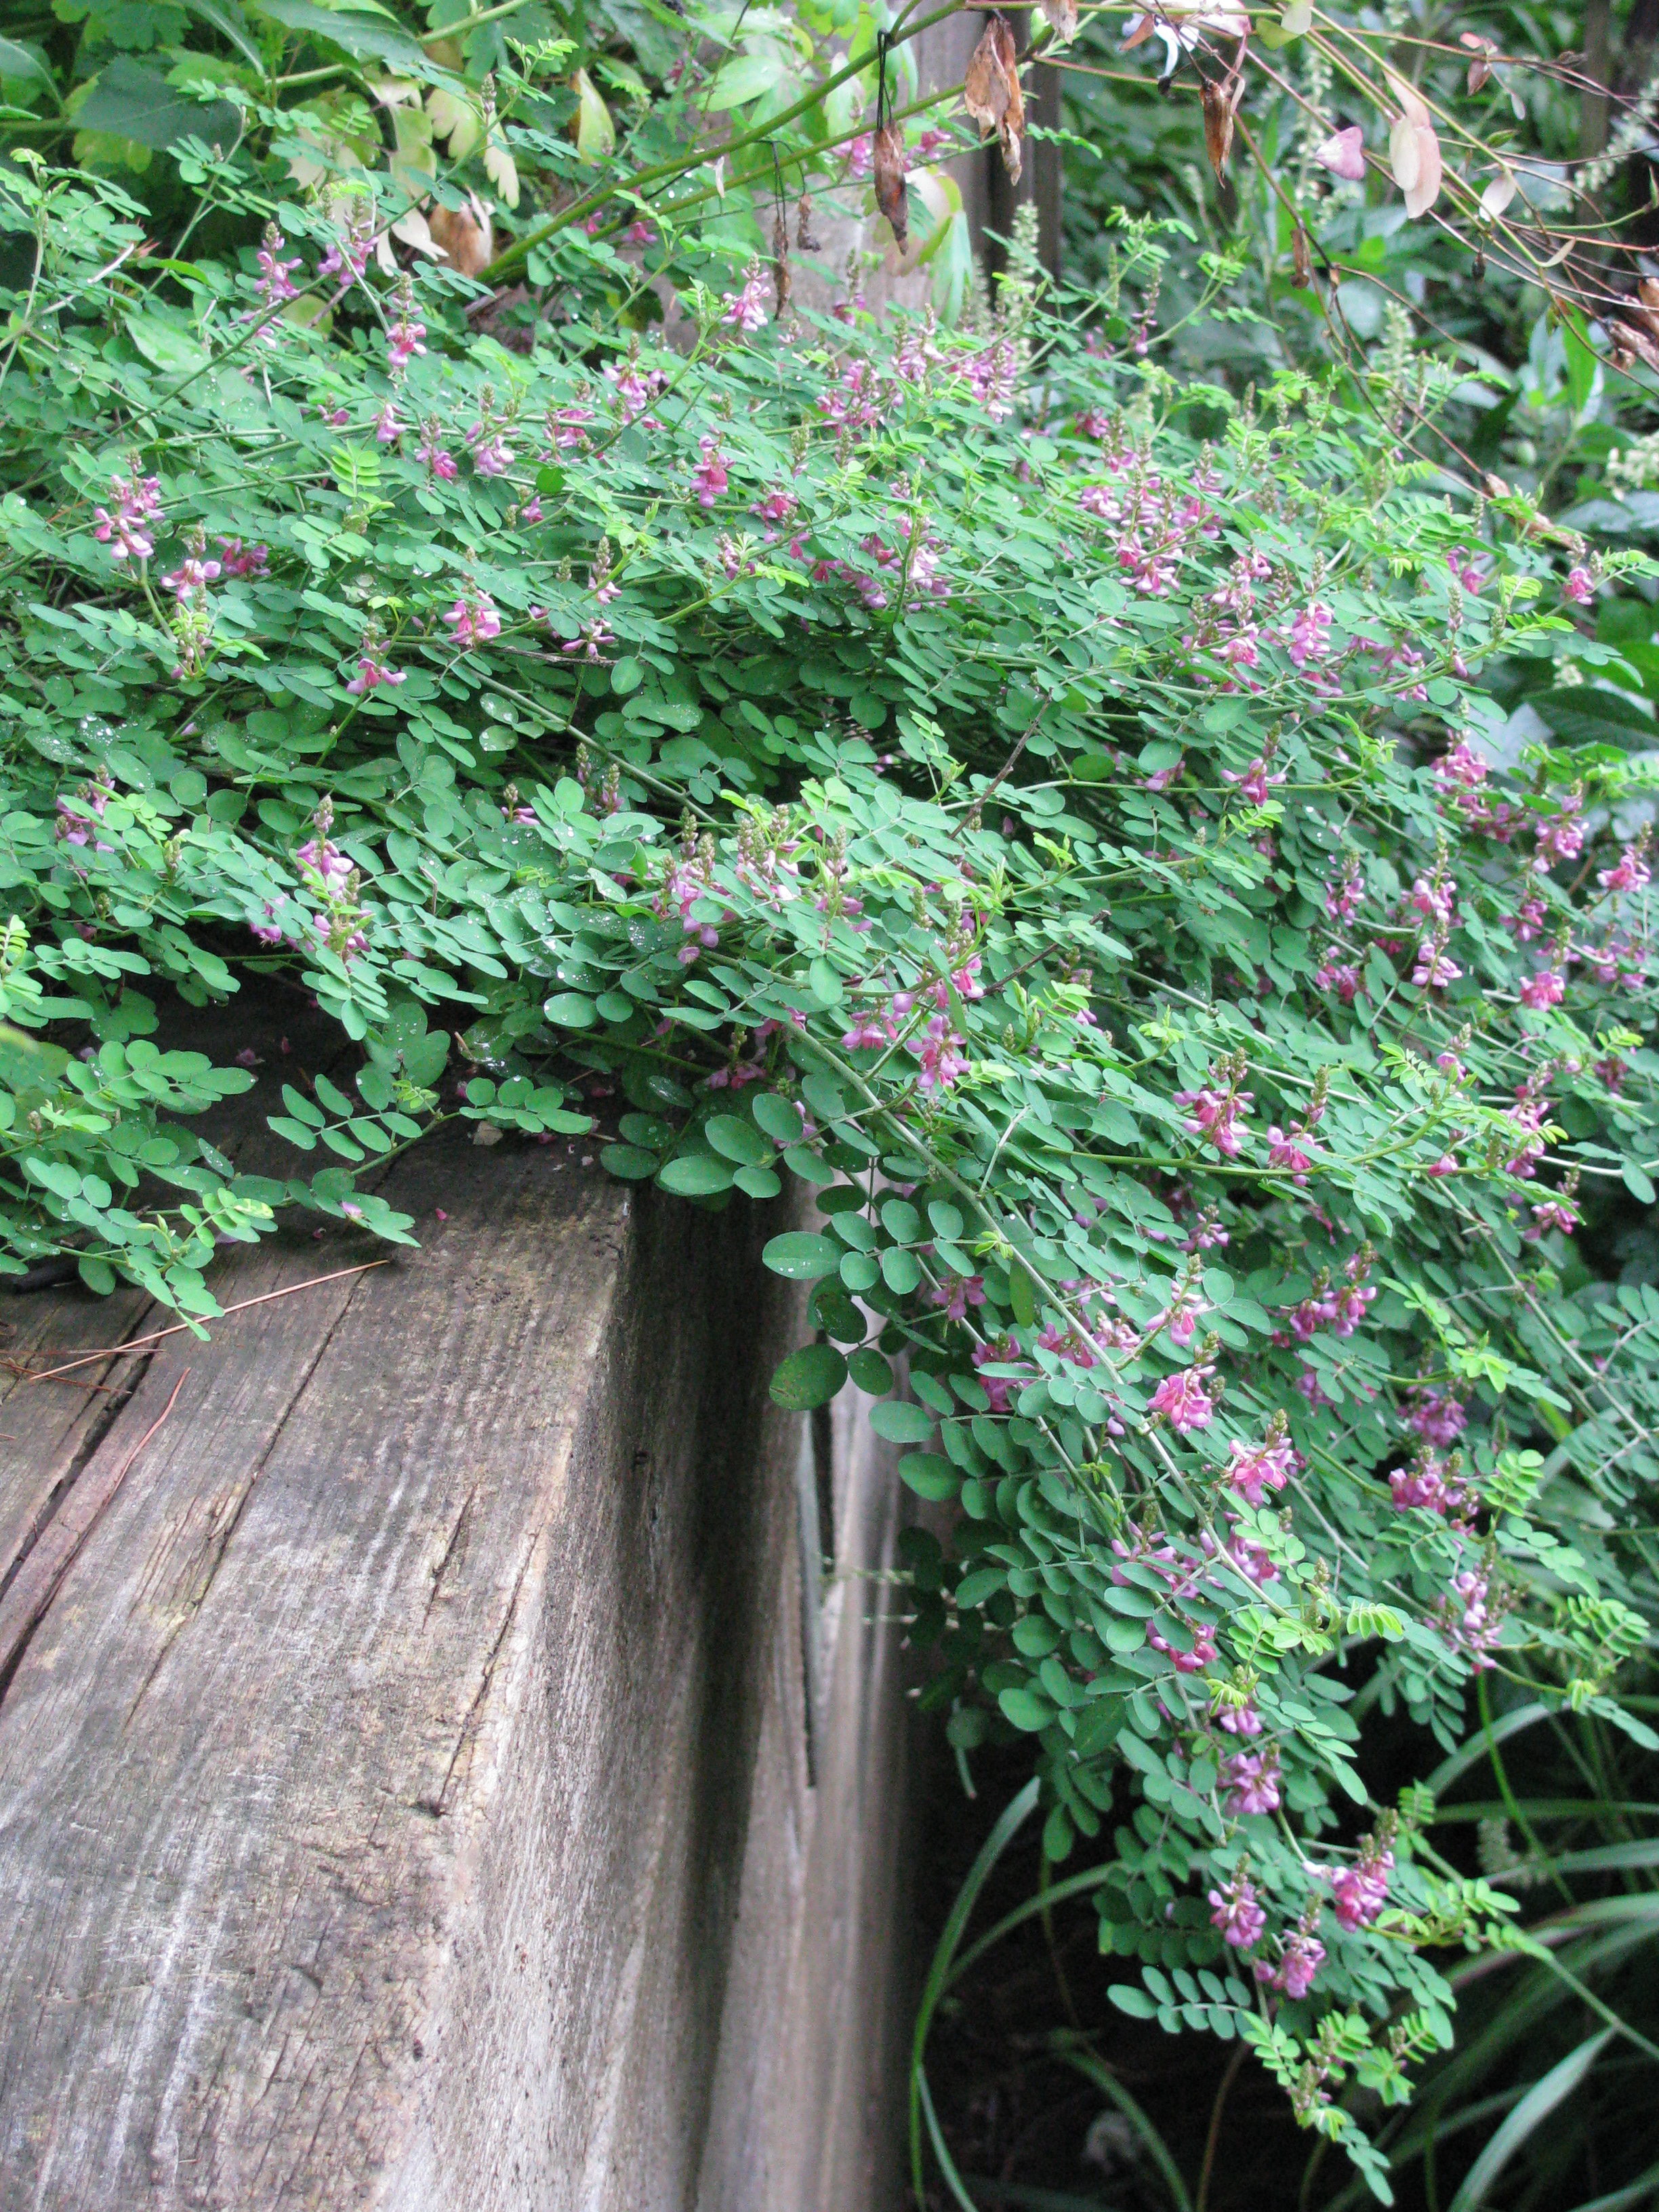 Indigofera Rose Carpet is a wonderful groundcover for late summer color in dry placesimg_1079.jpg